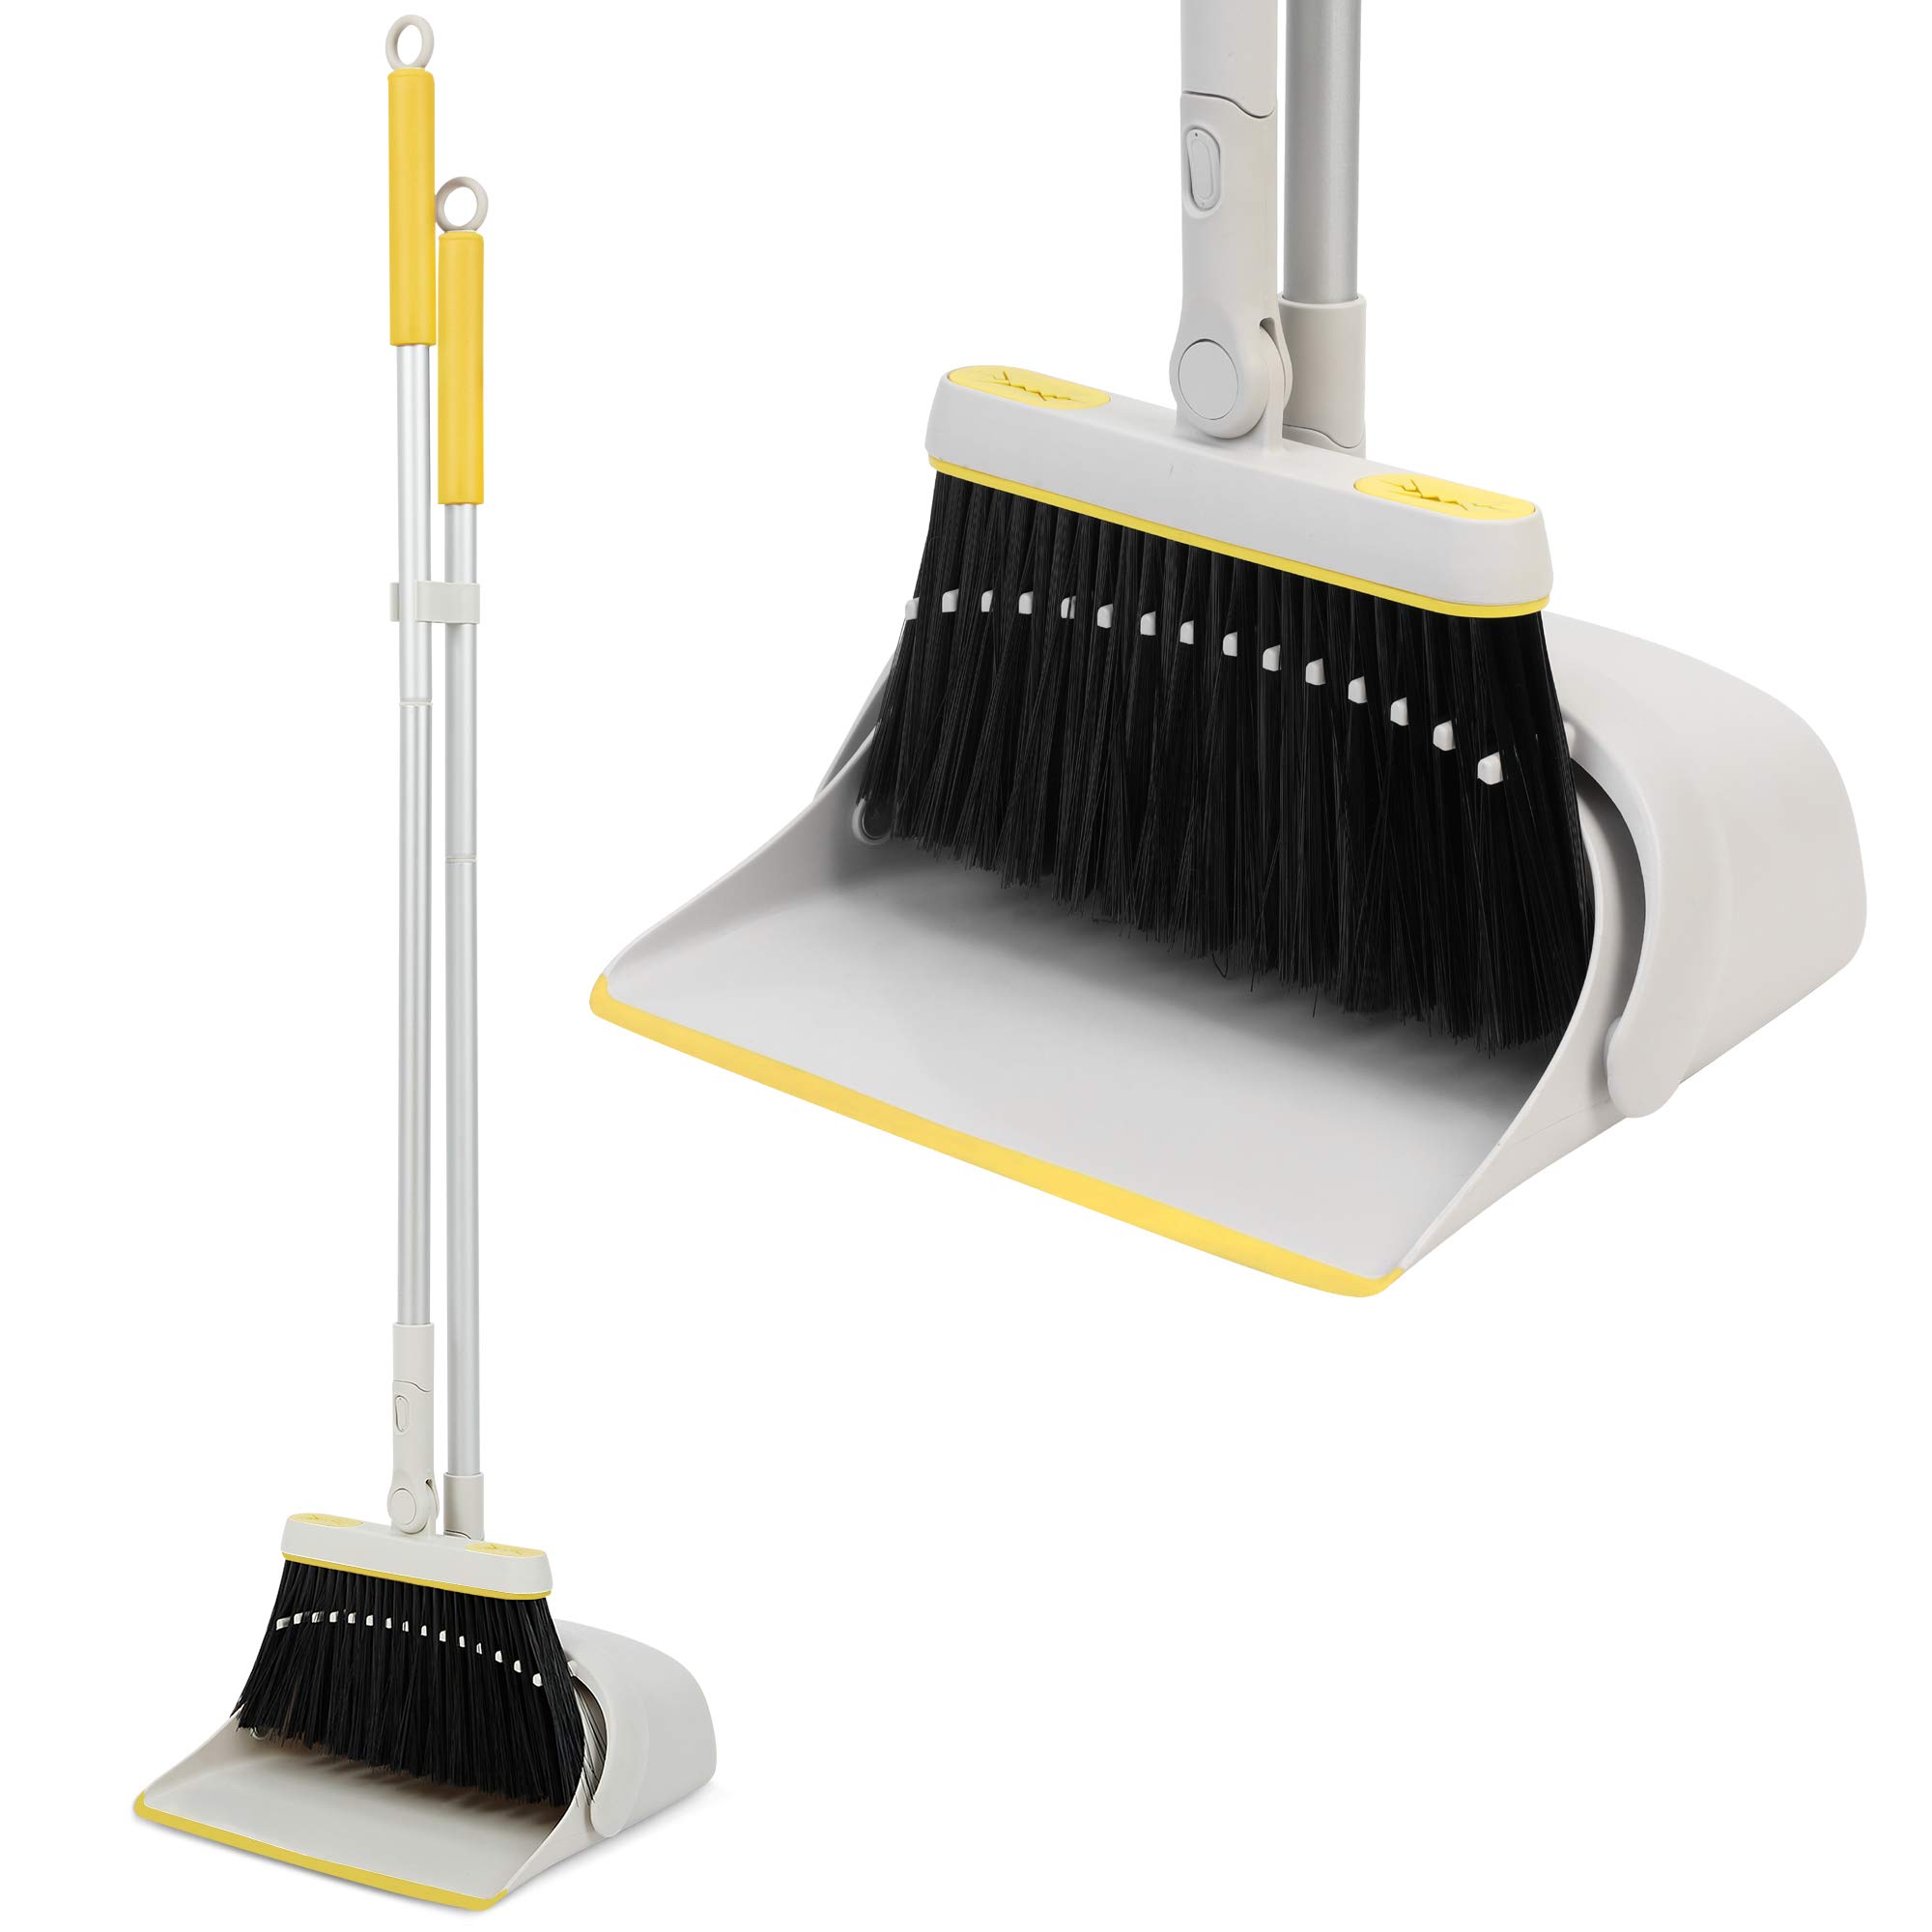 Jekayla Broom and Dustpan Set with Extendable Long Handle, Upright and Lightweight Cleaning Combo for Home Kitchen Room Office Lobby, Yellow and Grey